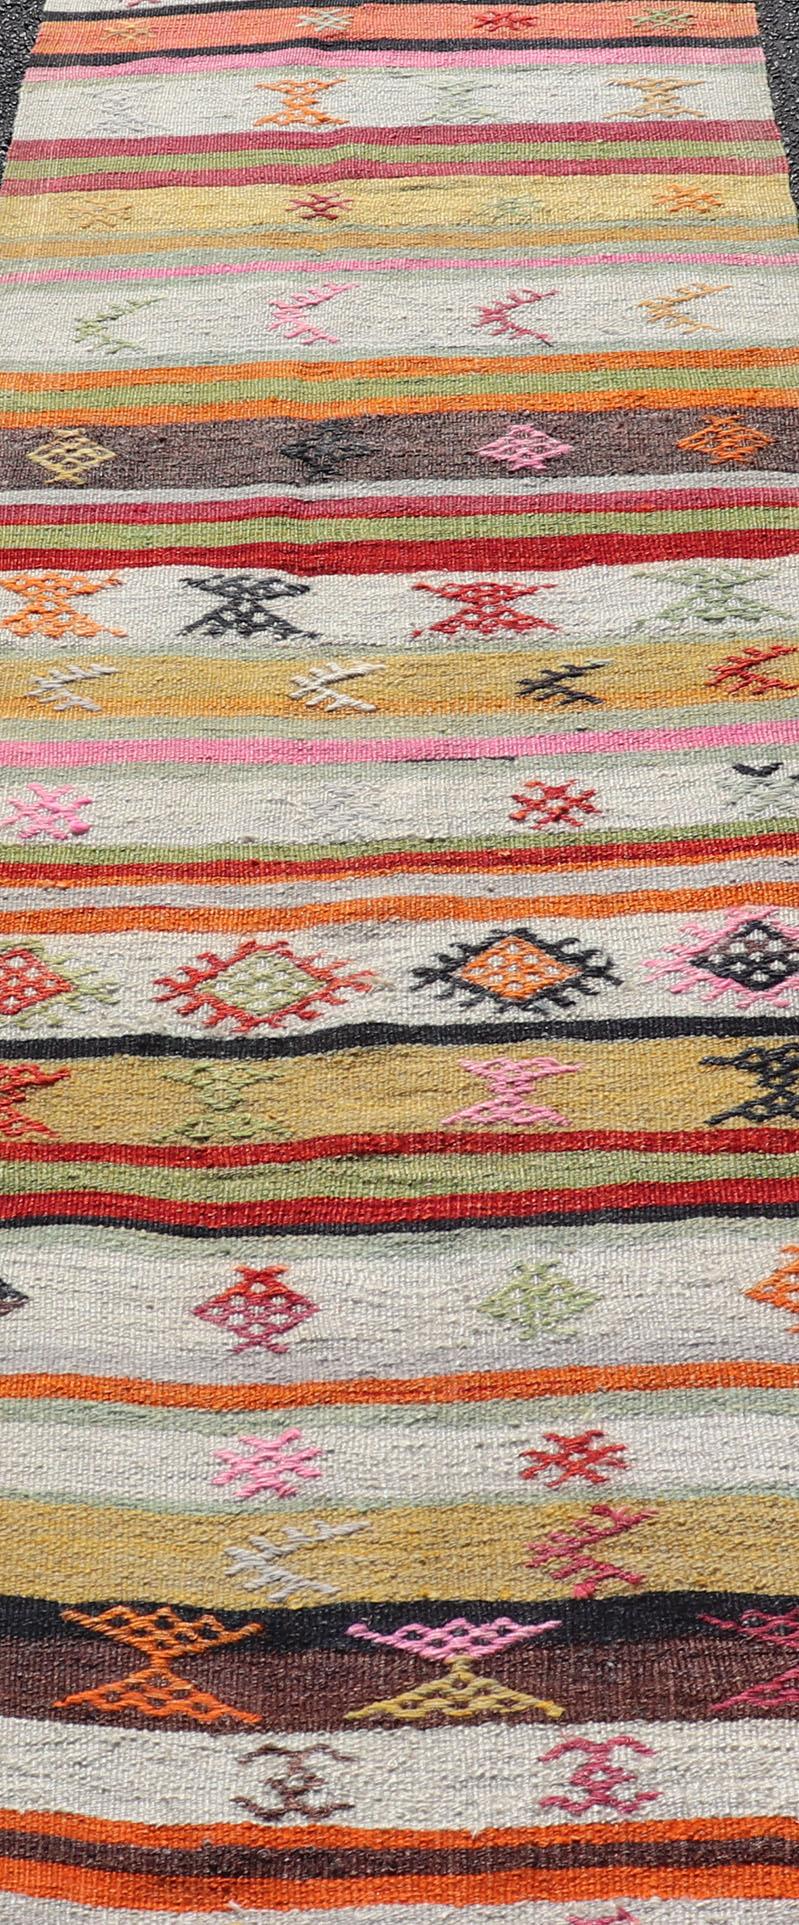 Wool Vintage Hand Woven Turkish Kilim Colorful Stripe Runner with Tribal Motifs For Sale